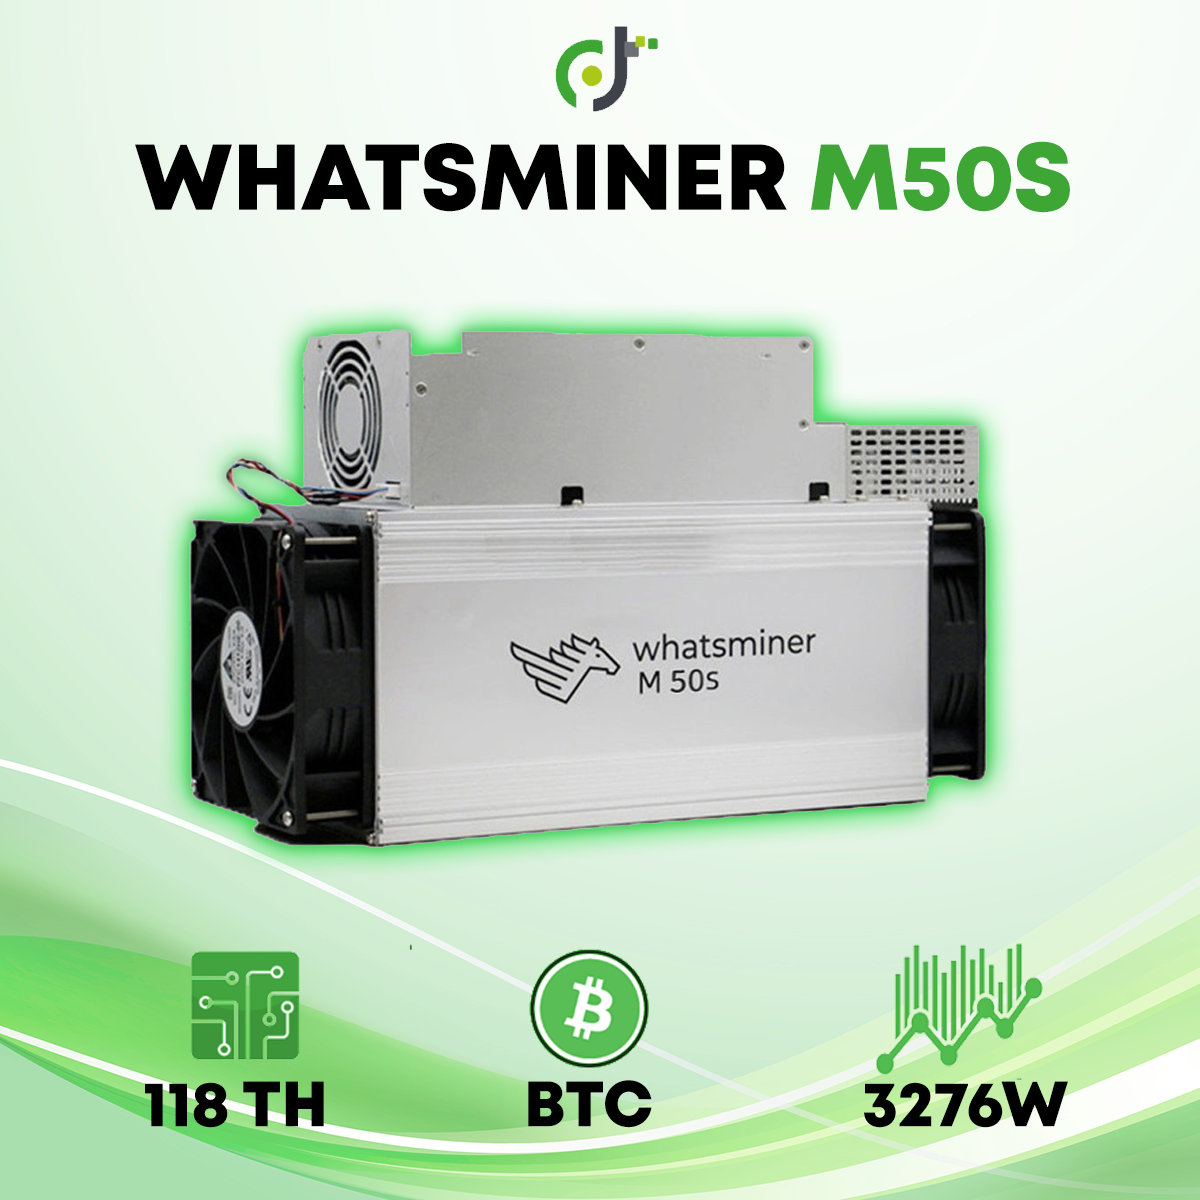 MicroBT Whatsminer M50S (118Th) Bitcoin Crypto ASIC Miner